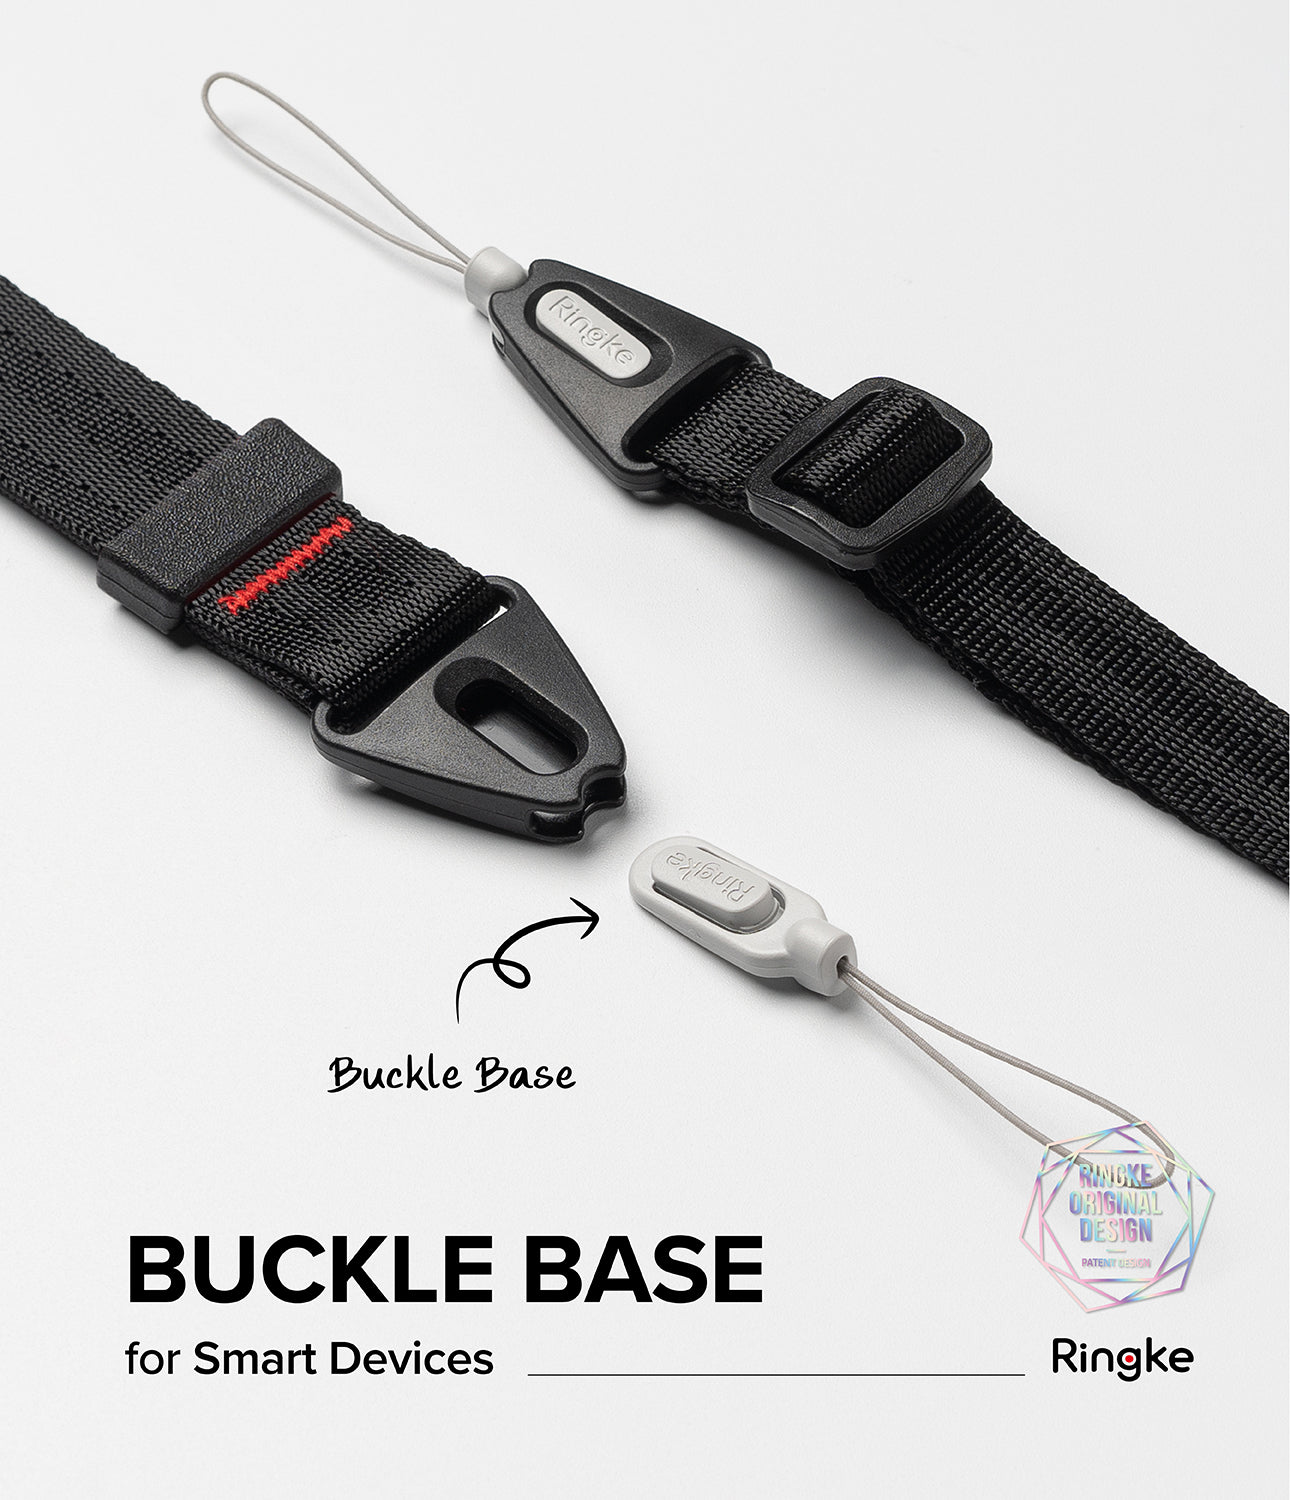 Buckle Base for Smart Devices